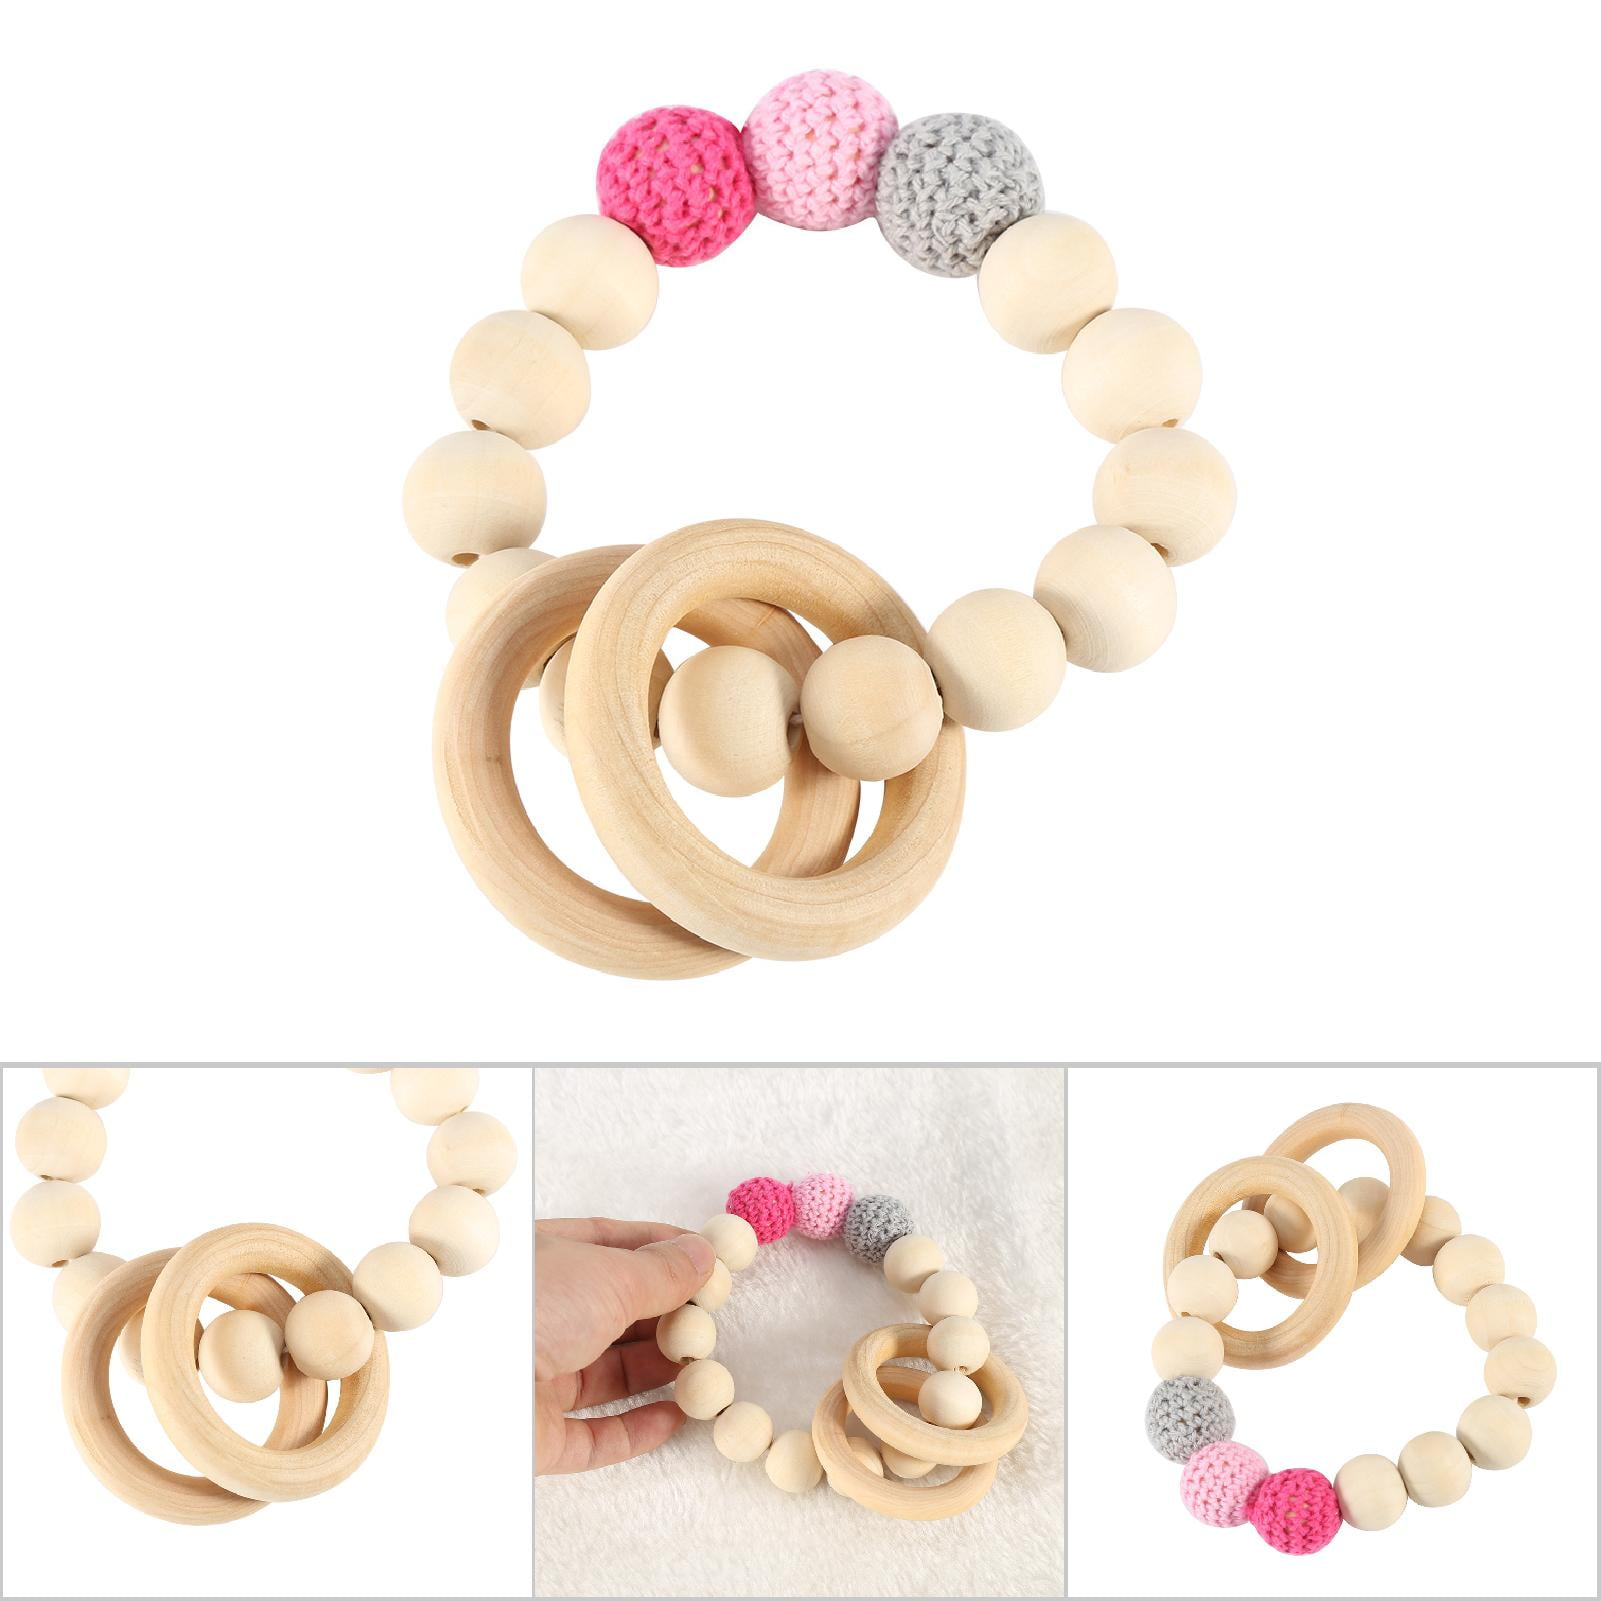 Wooden Baby Teether Bracelet Crochet Beads Teething Ring Play Chewing Toy Hot